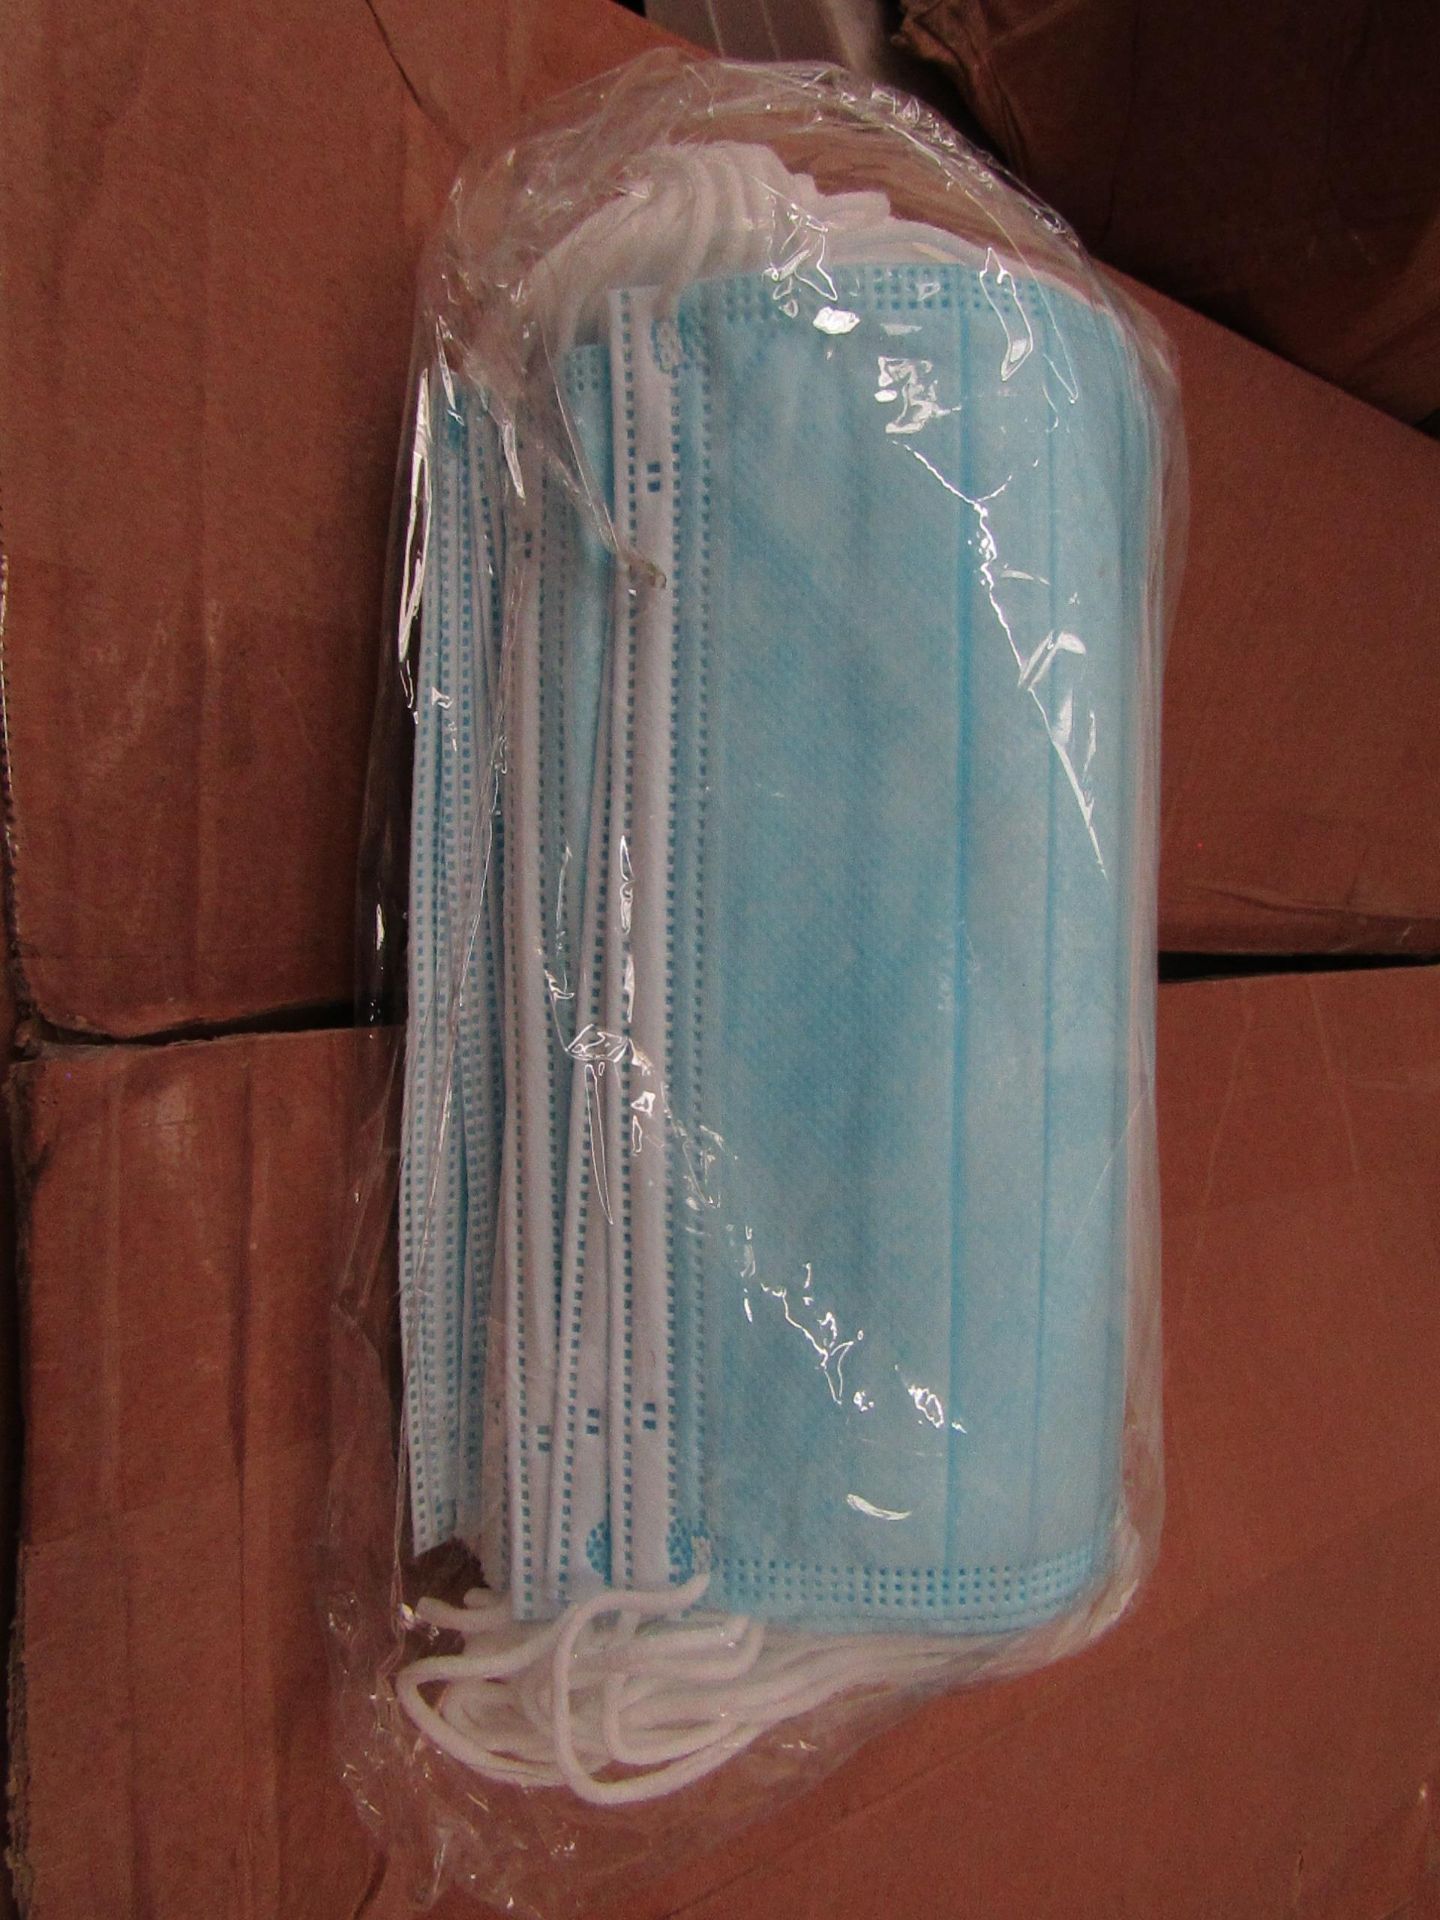 4x Pack of 50x disposable face masks - New & Packaged. - Image 2 of 2